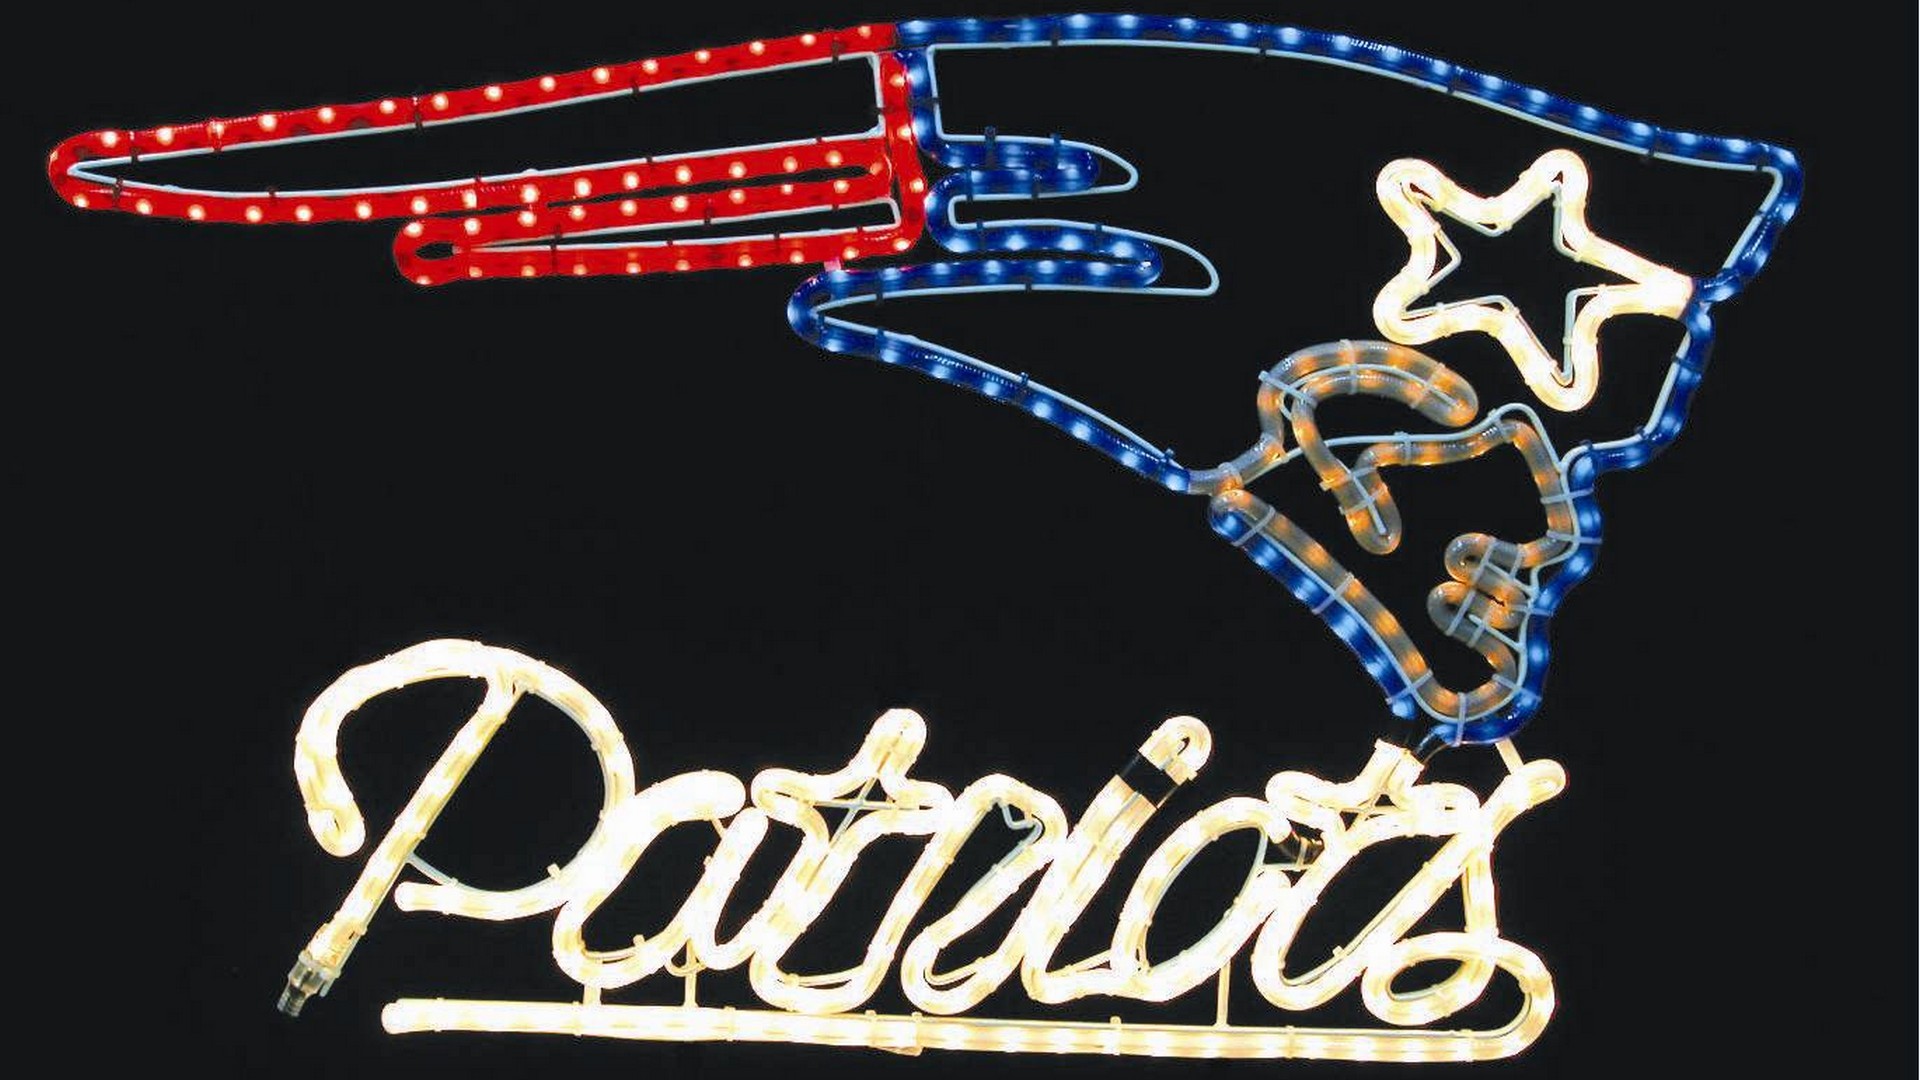 Backgrounds NE Patriots HD With Resolution 1920X1080 pixel. You can make this wallpaper for your Mac or Windows Desktop Background, iPhone, Android or Tablet and another Smartphone device for free